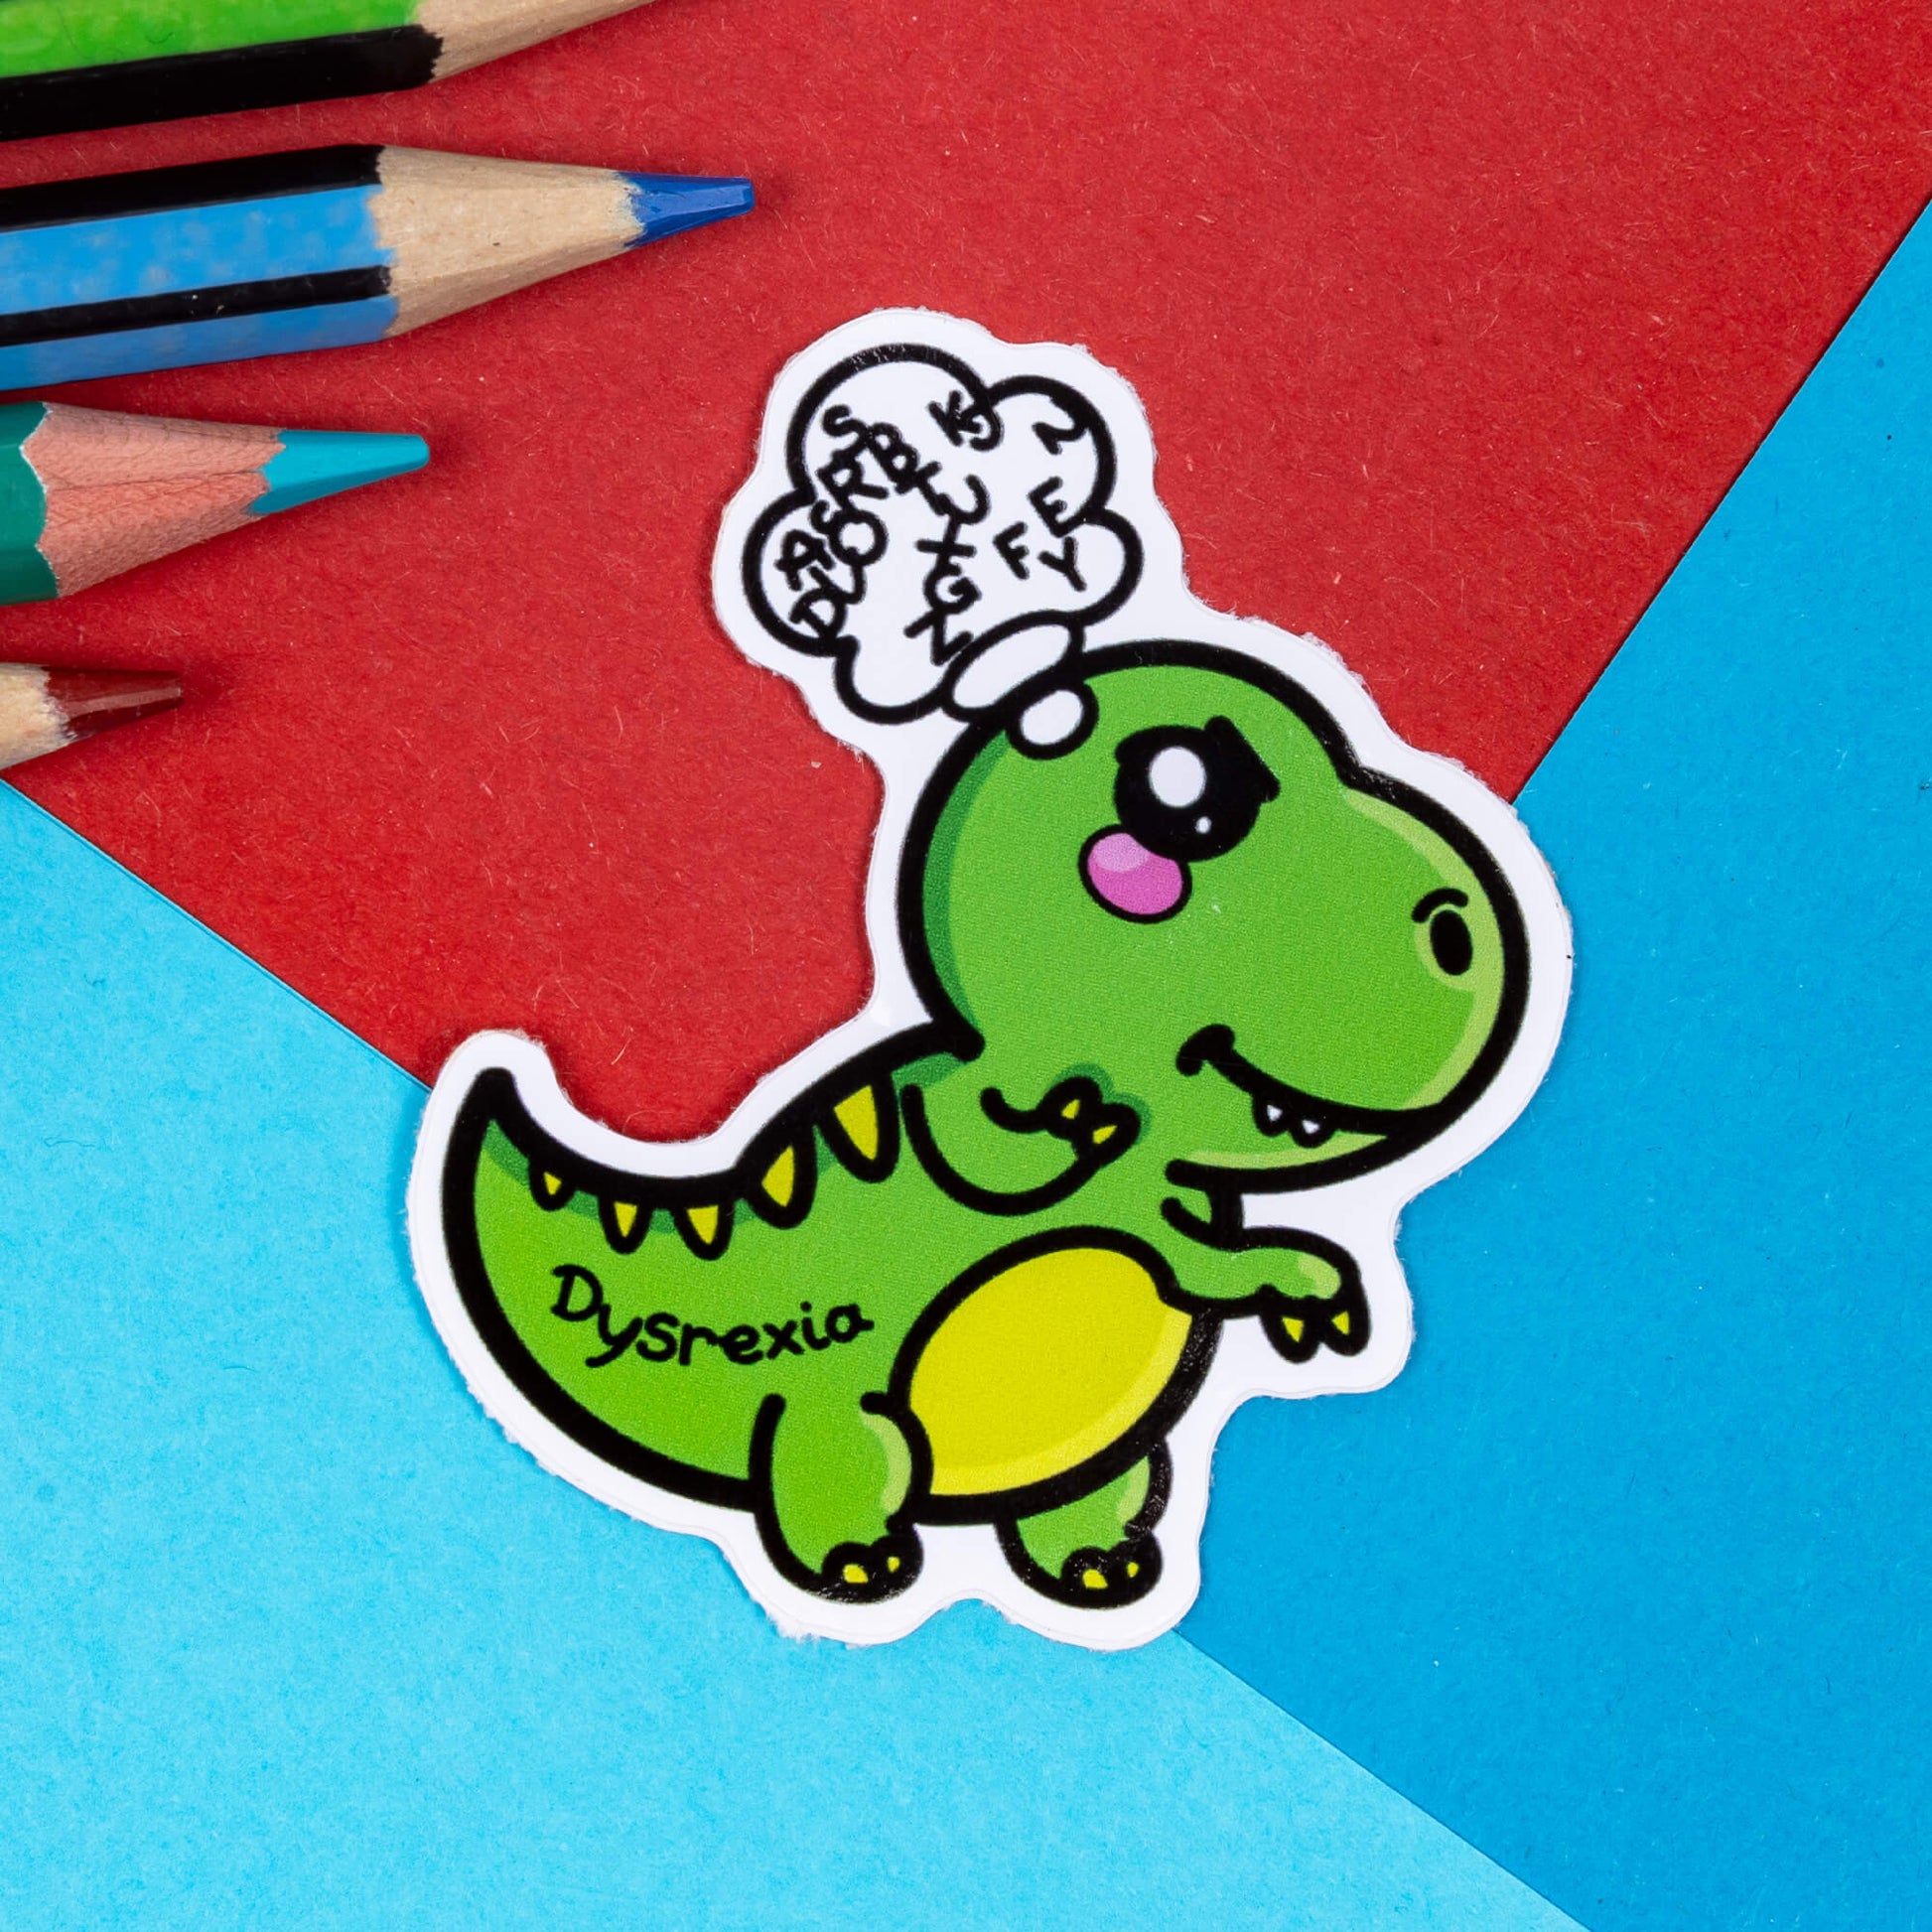 A sticker of a little green dinosaur with Dysrexia written on their tail and muddled letters in a speech bubble above their head on a red and blue background